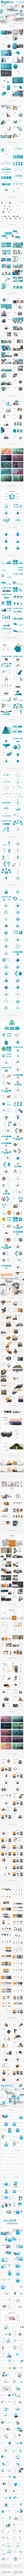 3 in 1 BigMax Pitch Deck Powerpoint Bundle Template